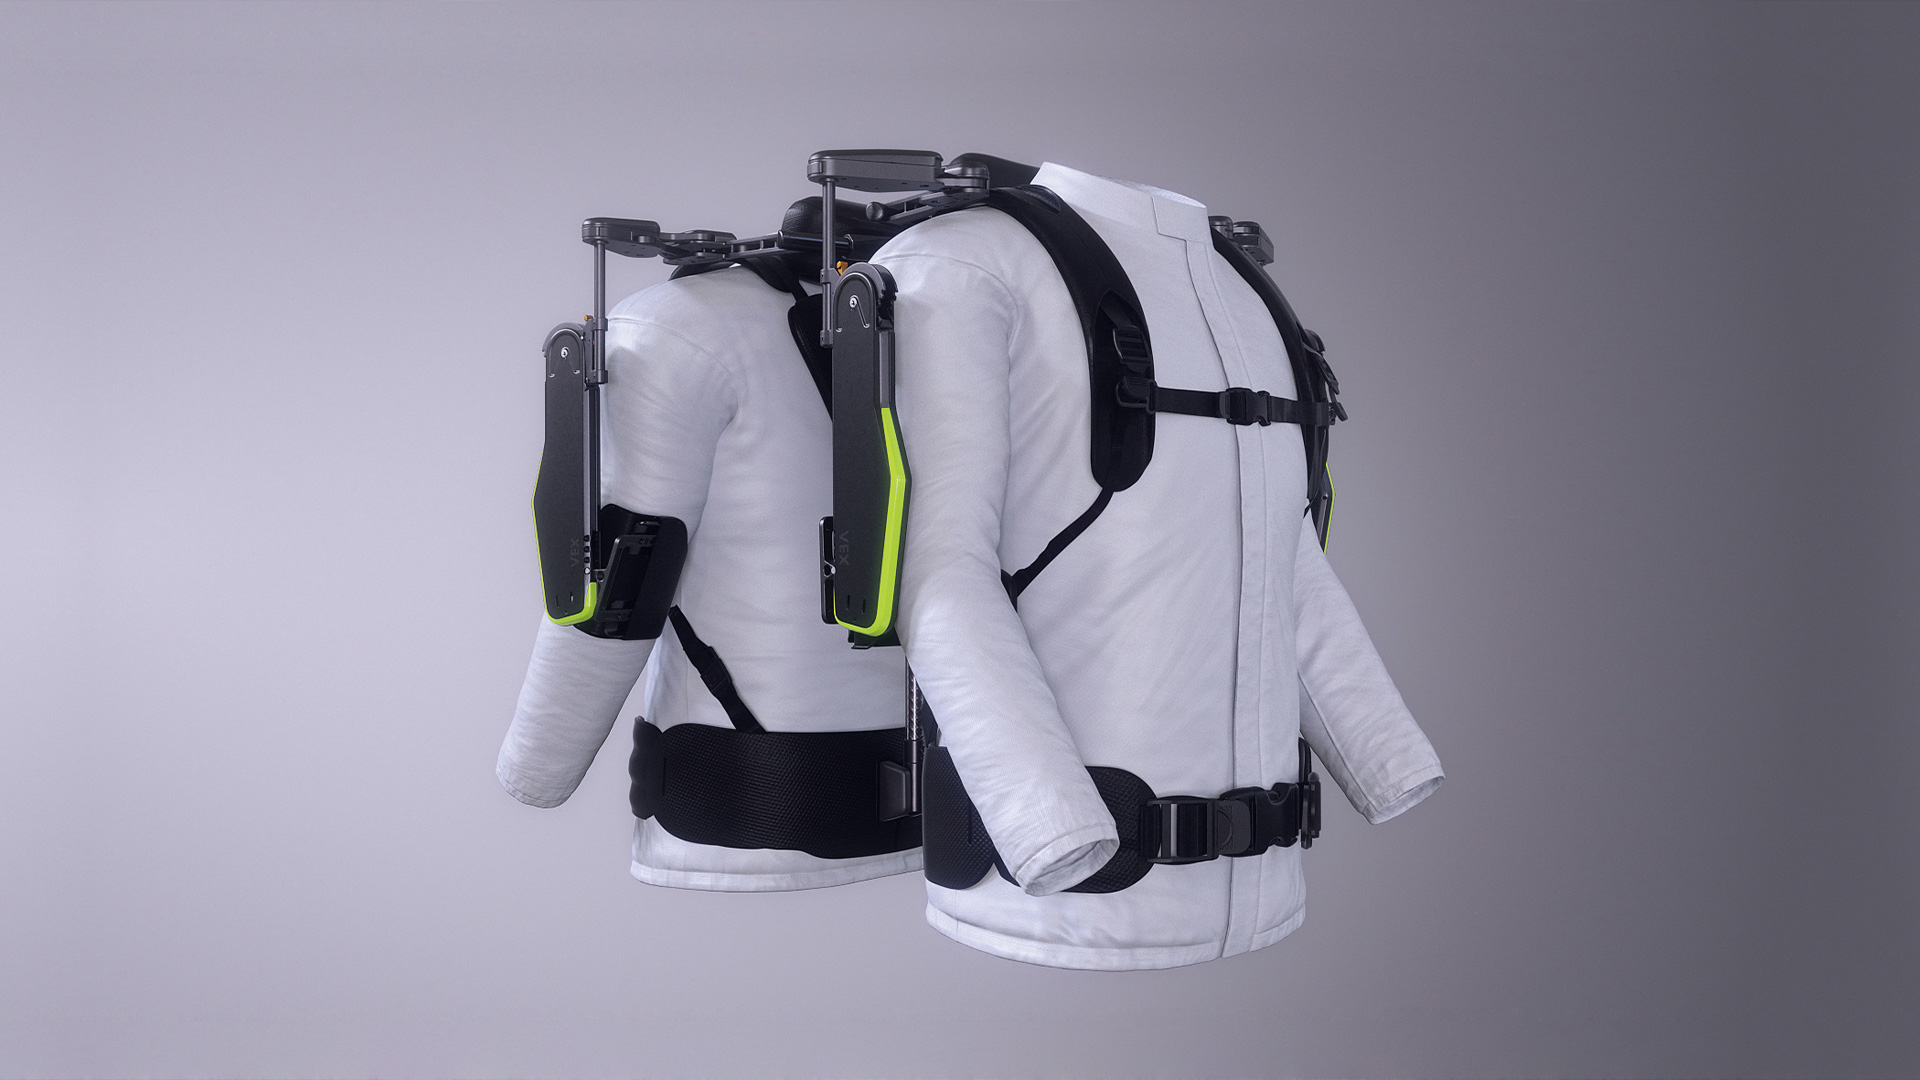 Vest-shaped wearable robot The Vex